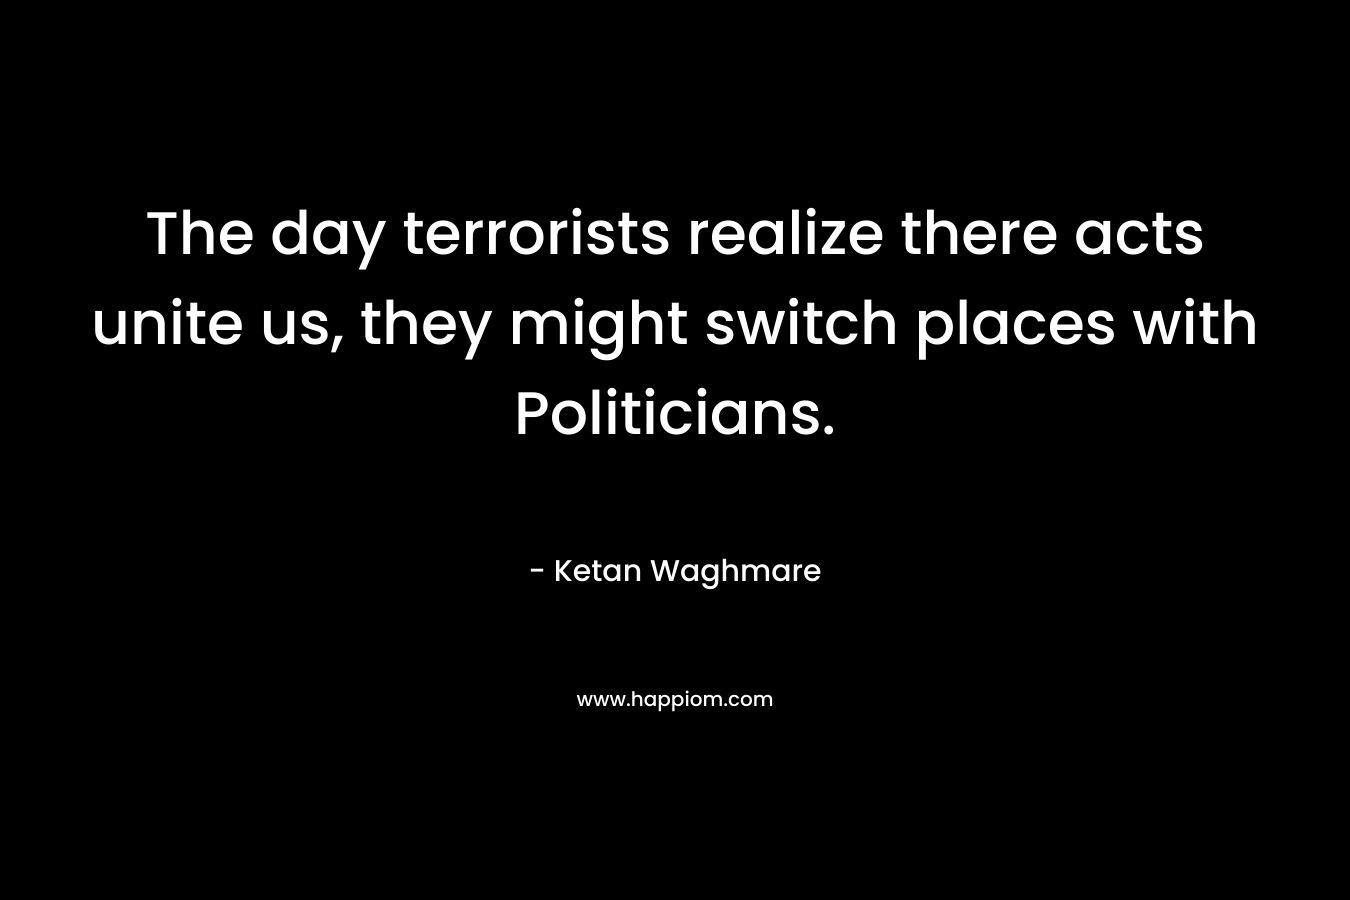 The day terrorists realize there acts unite us, they might switch places with Politicians.